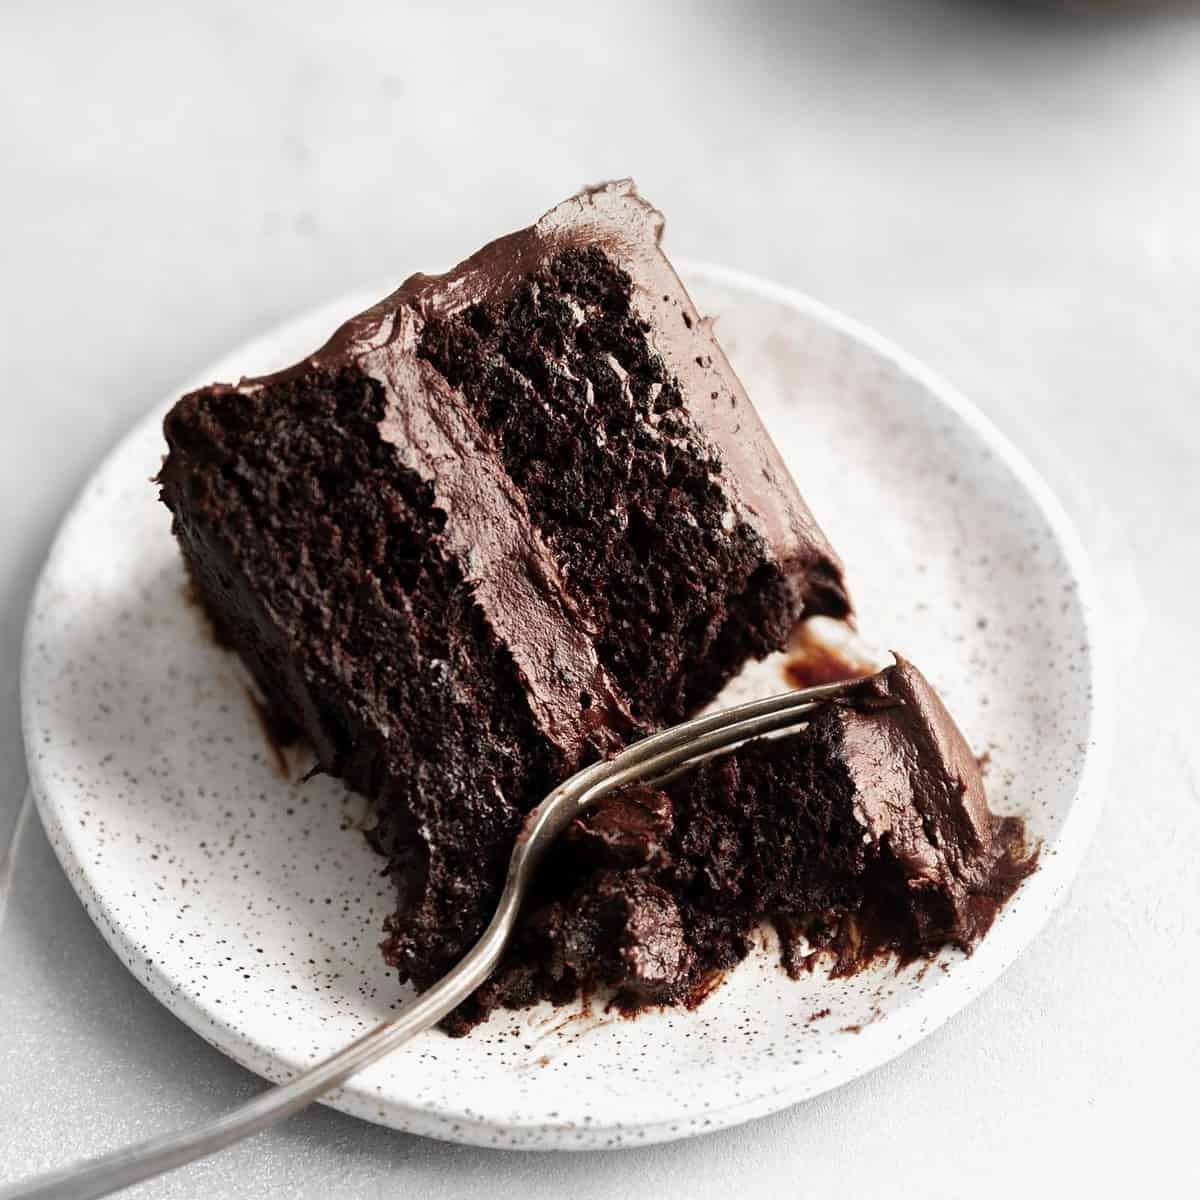  No need to sacrifice taste for health - this chocolate cake is the best of both worlds.